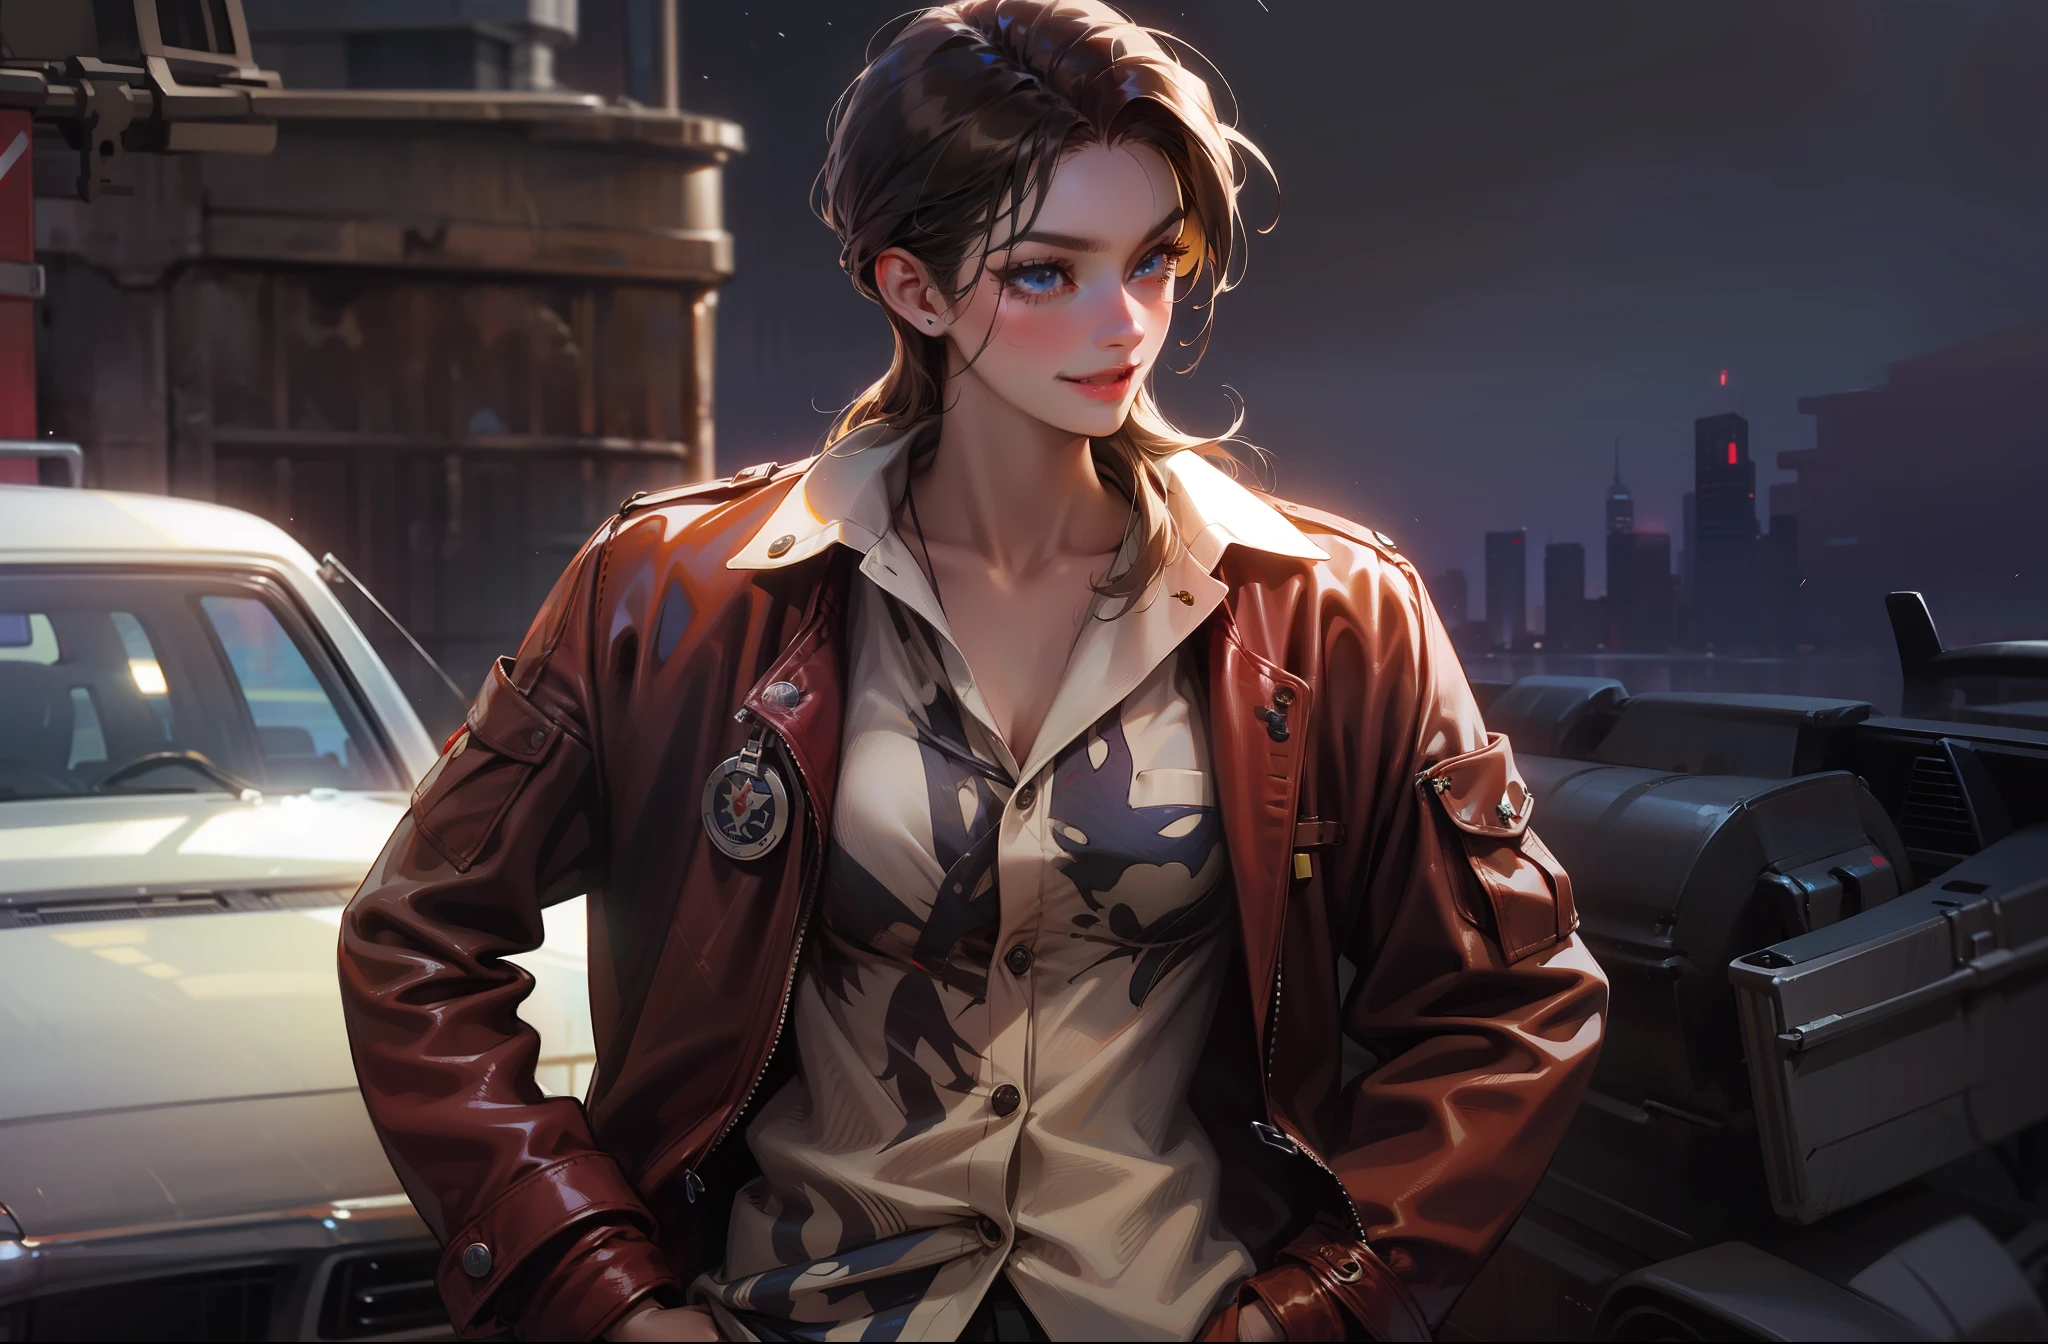 Anime style, Ridiculous, high resolution, super detailed), 1 girl, beautiful, solo, mature, (long messy yellow-ish brunette hair laying on shoulders with side bang), highest detail, smirking, medium breasts, showing teeth, looking forward, dumpster with white car background, dark blue eyes, long eyelashes, red leather jacket, button down summer shirt, hand on pockets, night setting